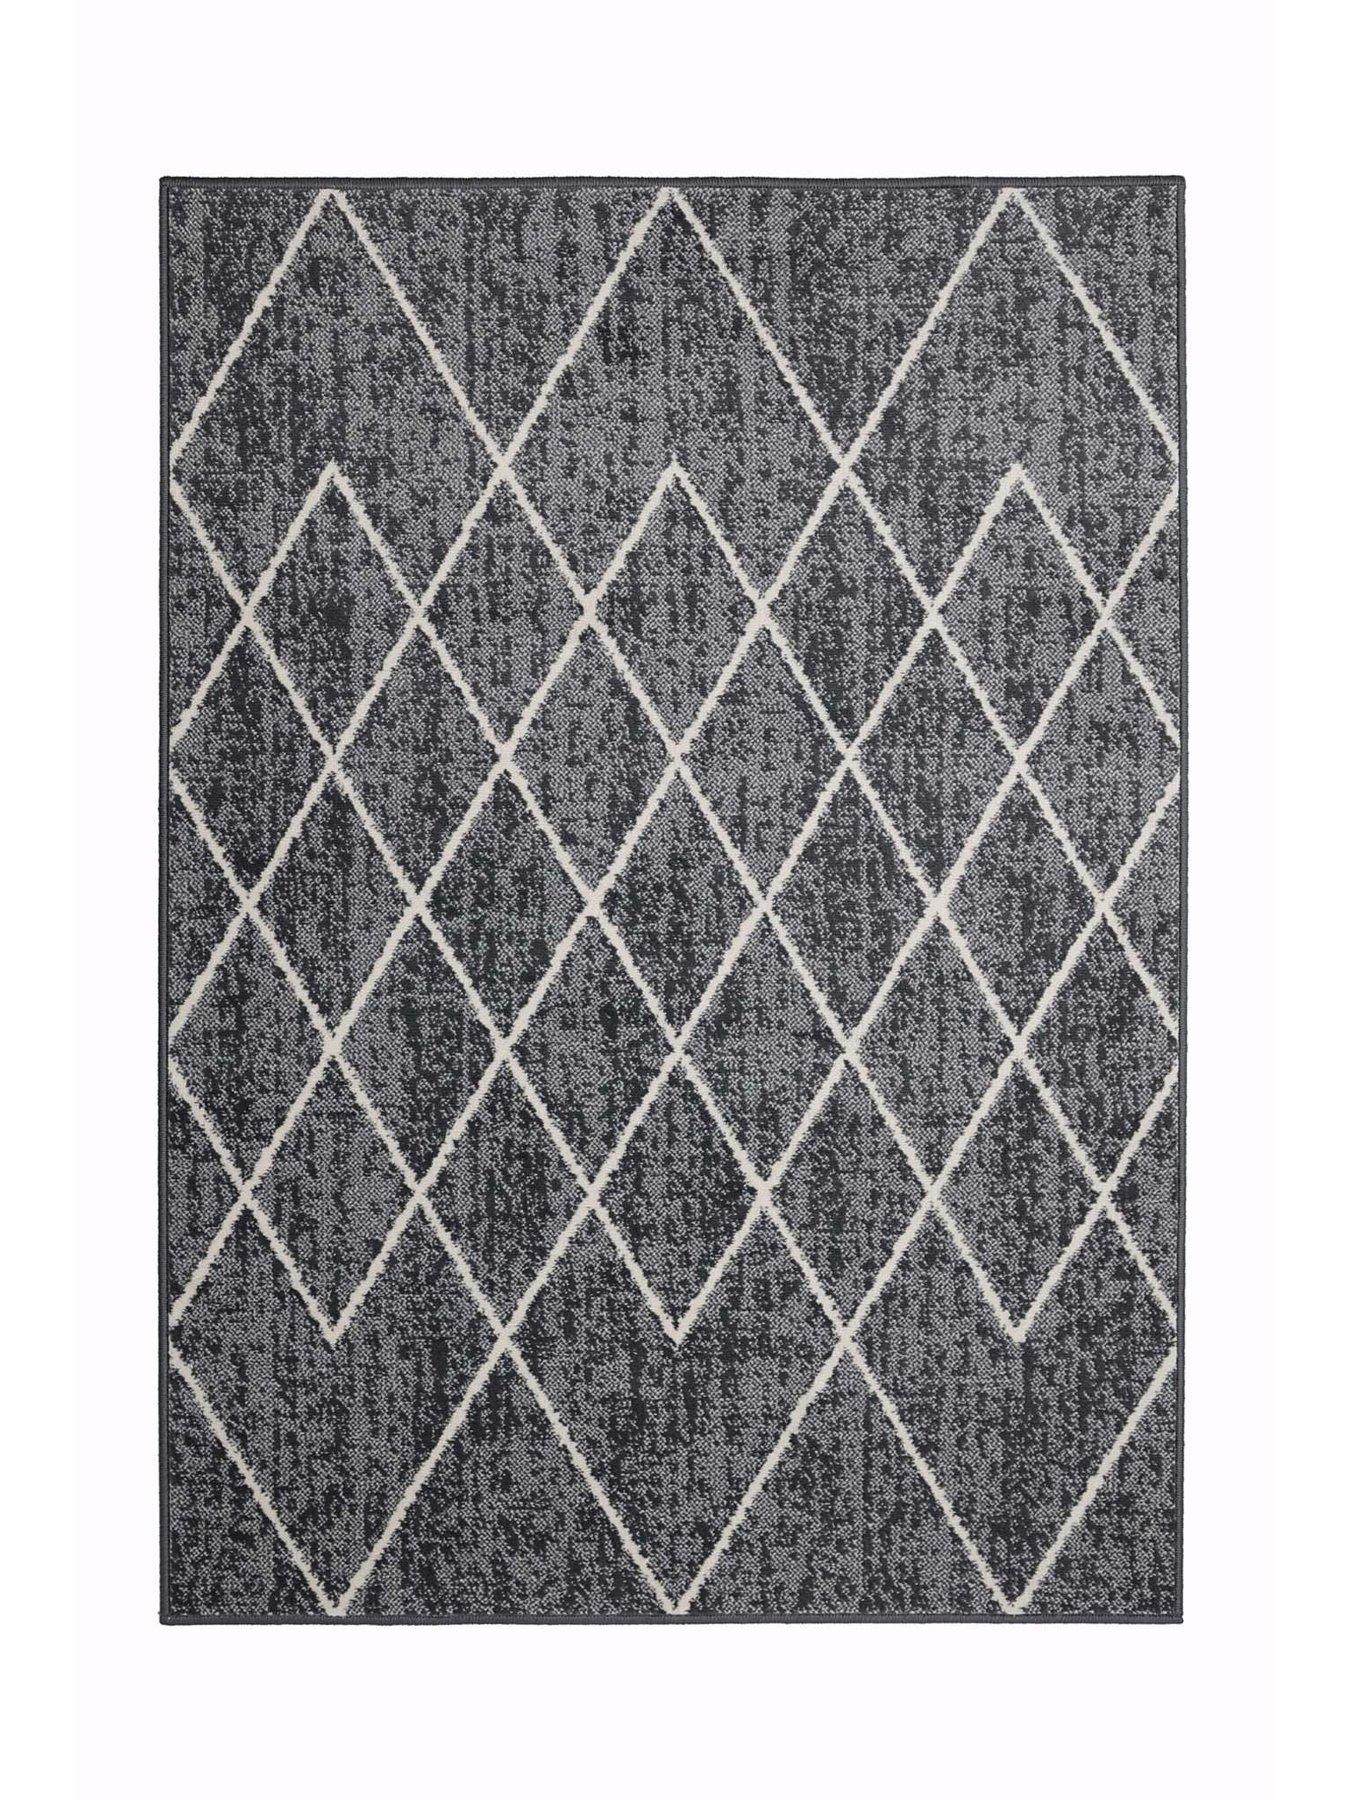 On Sale Prestwich Braided Jute Natural/Olive Green Round Rug Lowest Price  £99 At Rug Love